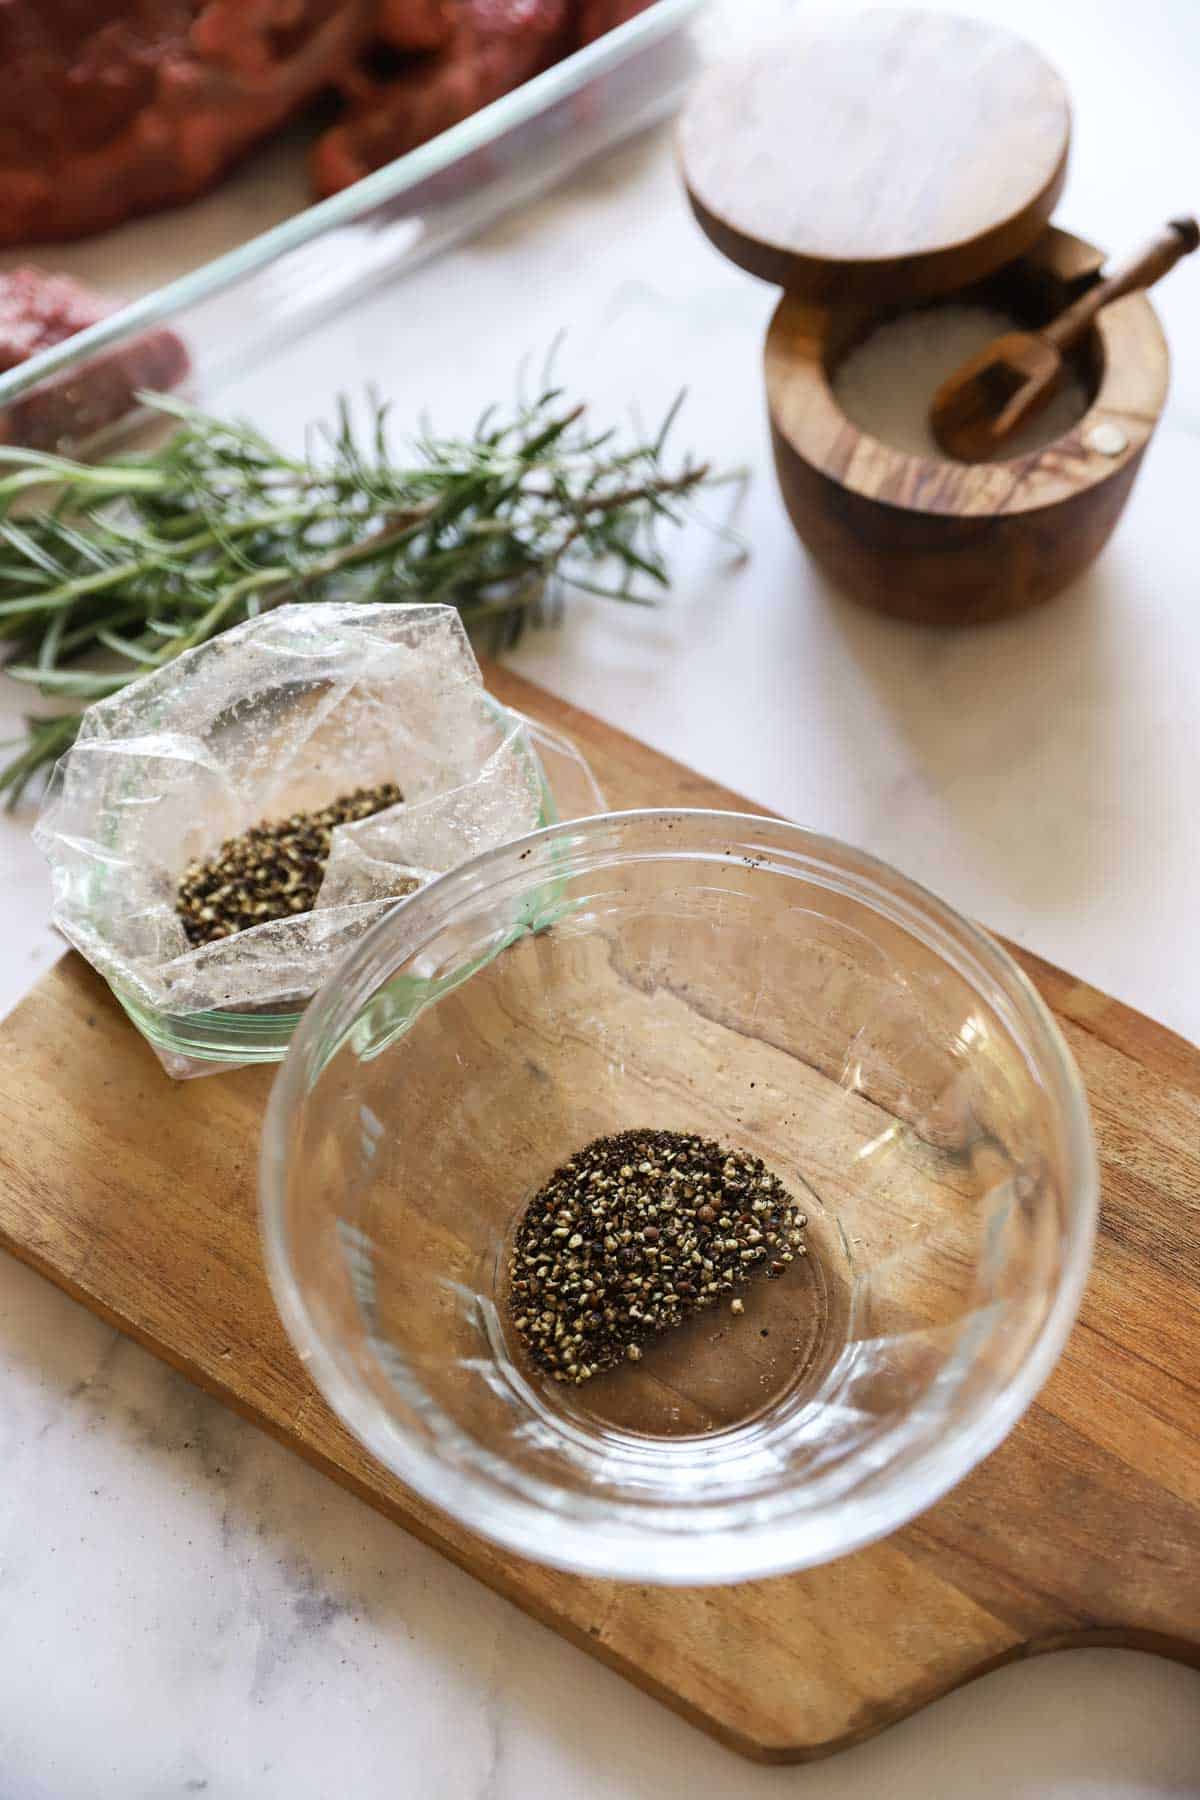 a bowl of cracked pepper and rosemary sprigs